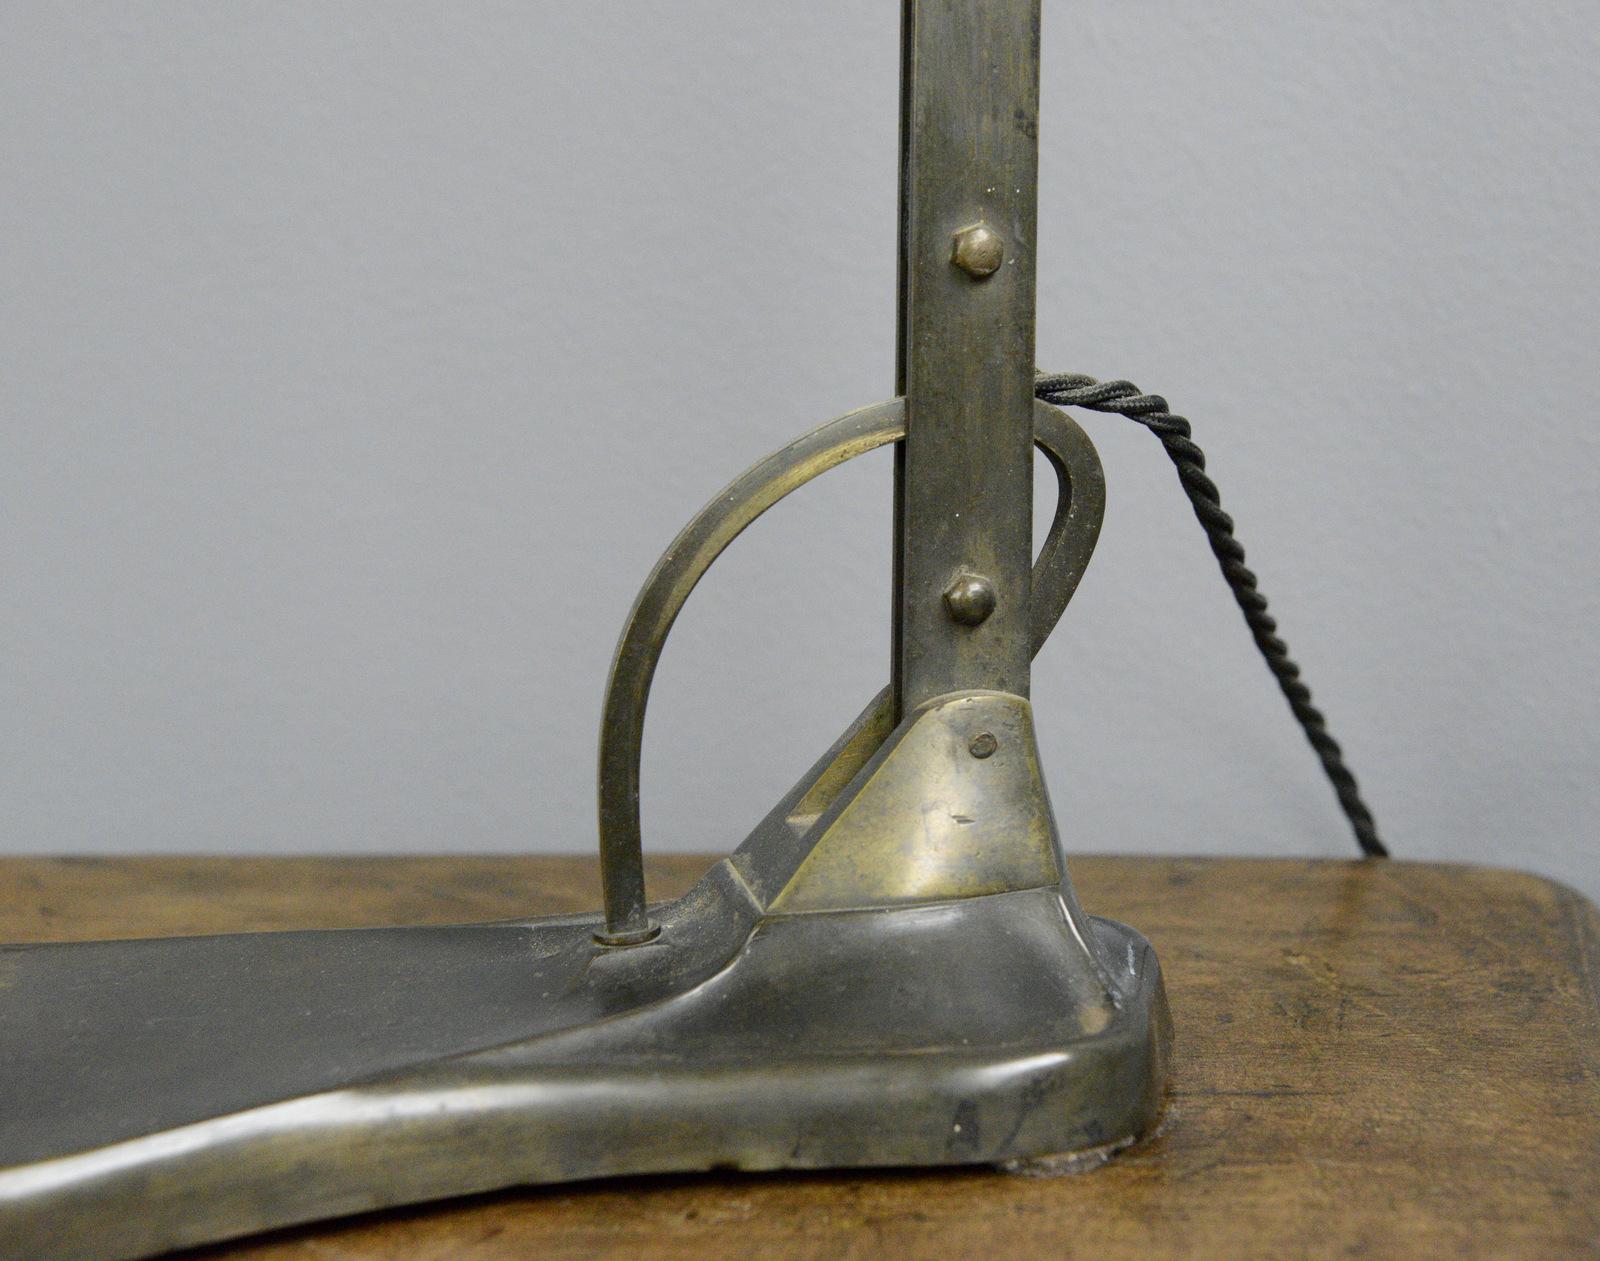 Mid-20th Century Desk Lamp by Robert Pfaffle for Erpees, circa 1920